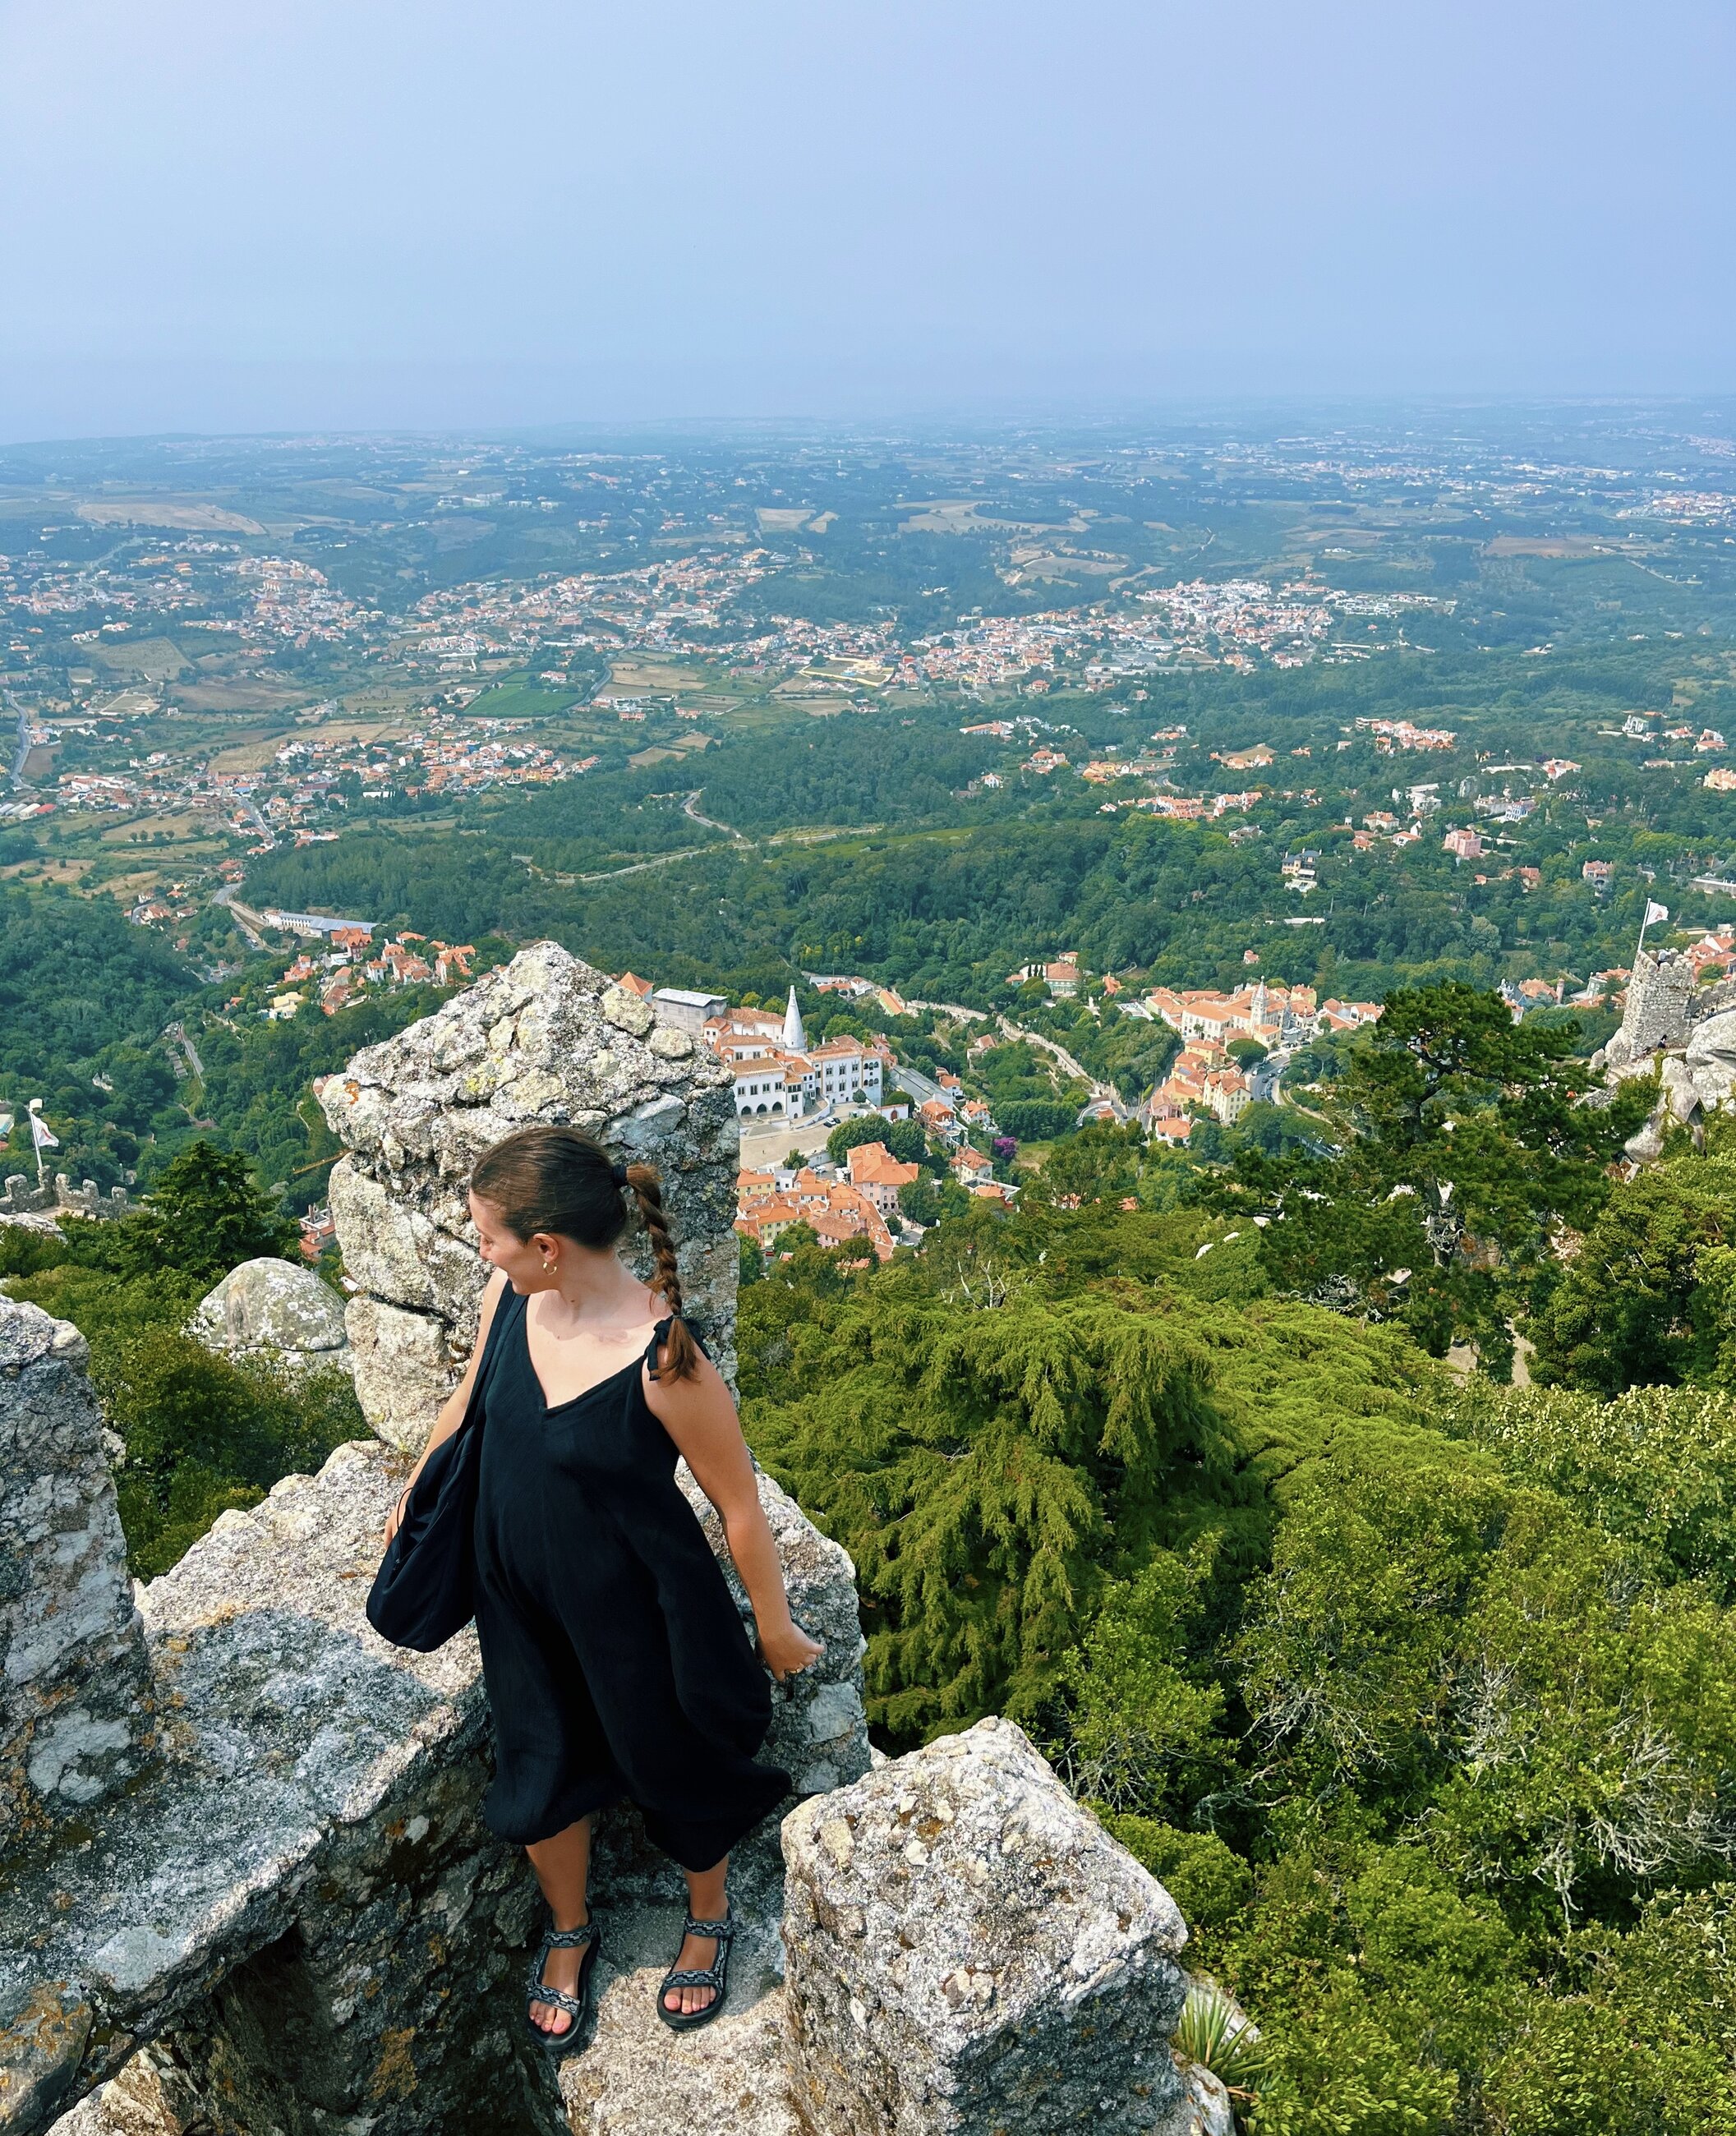 Views from the Moorish Castle (Castelo dos Mouros) in Sintra, Portugal.